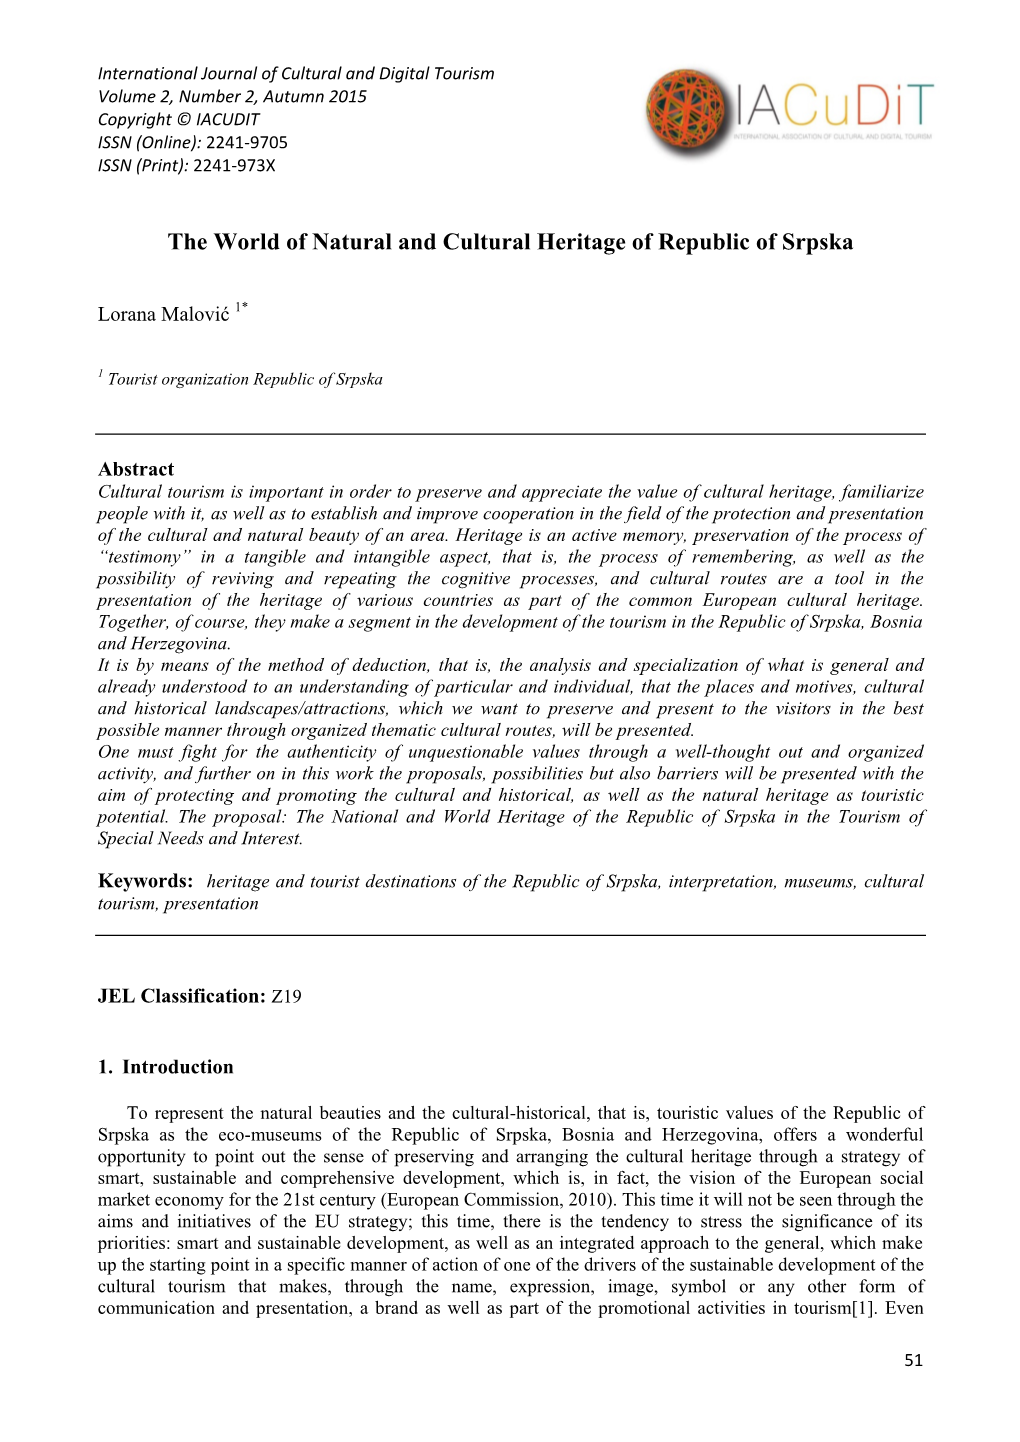 The World of Natural and Cultural Heritage of Republic of Srpska